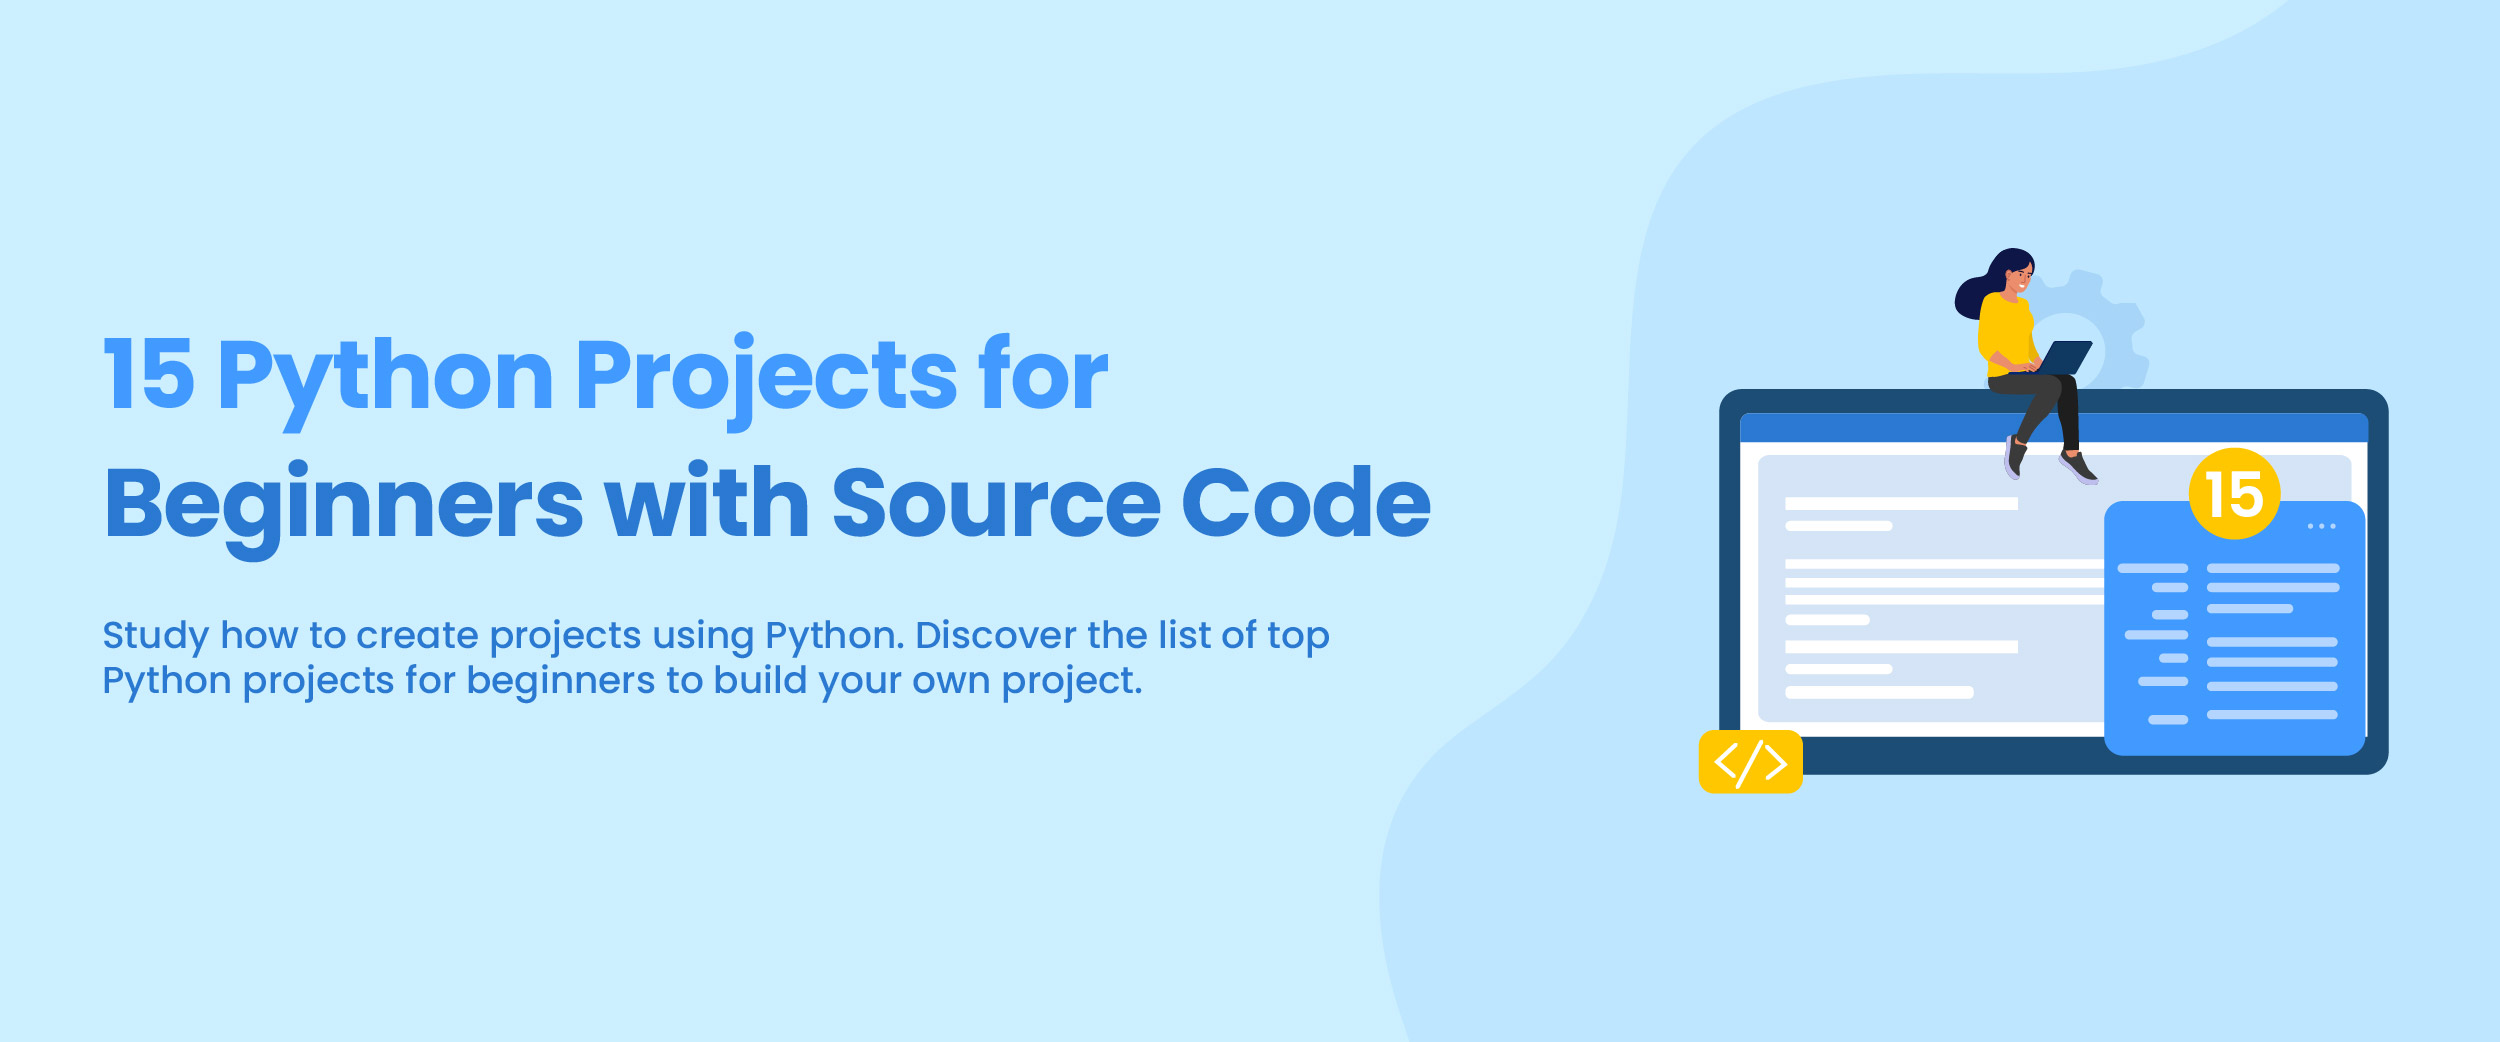 Python projects for beginners